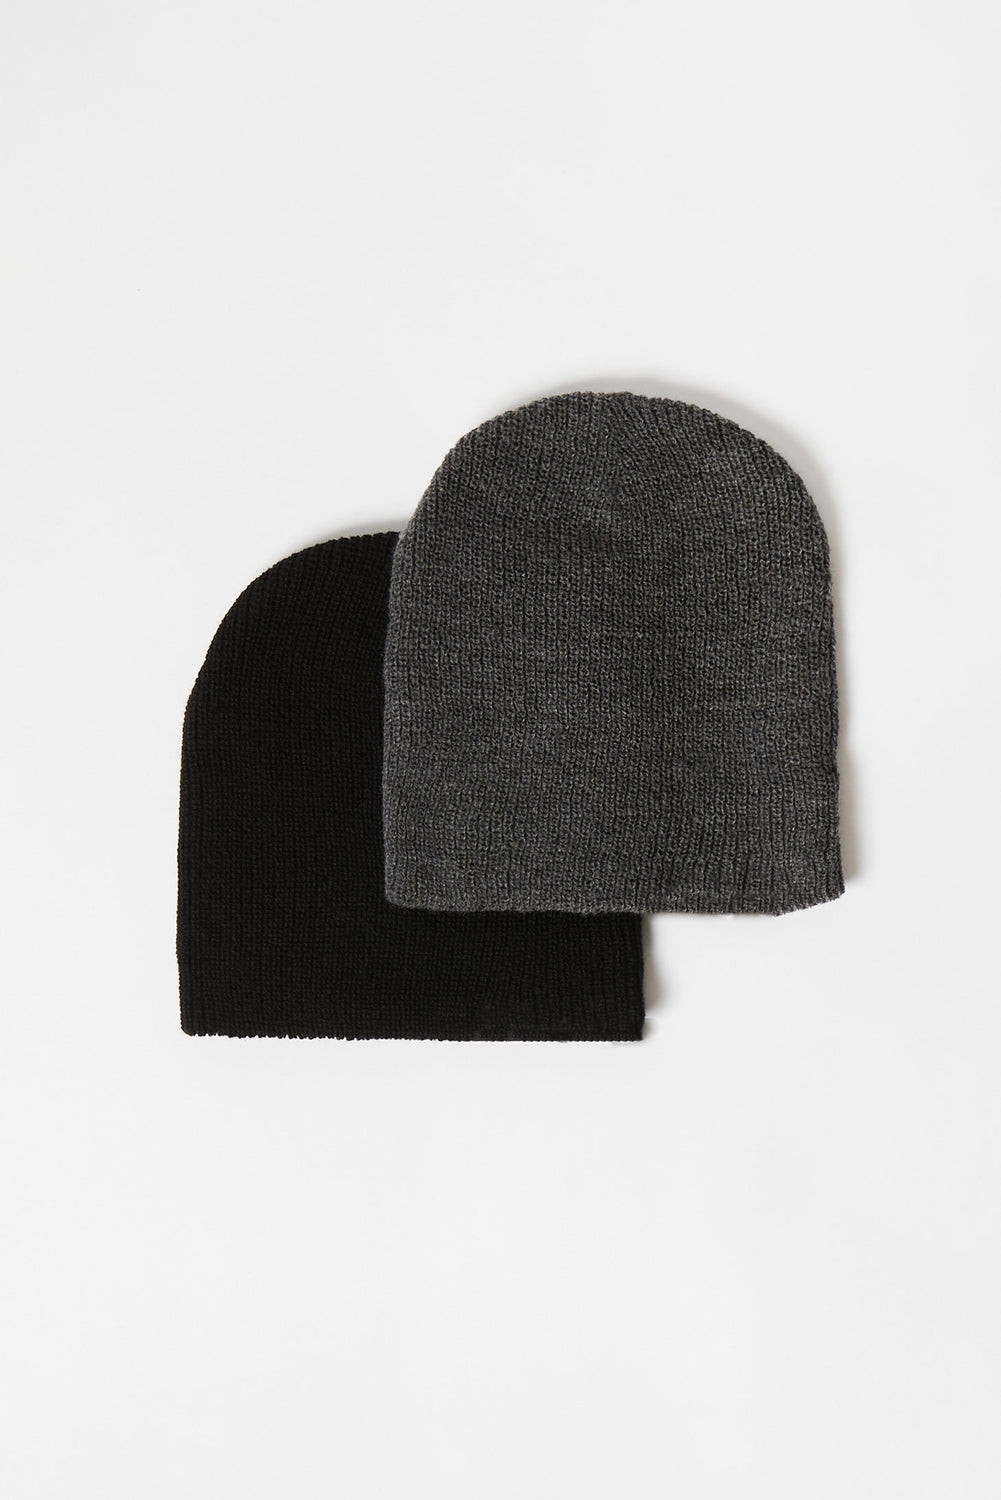 Zoo York Youth Basic Solid Beanie 2-Pack Charcoal